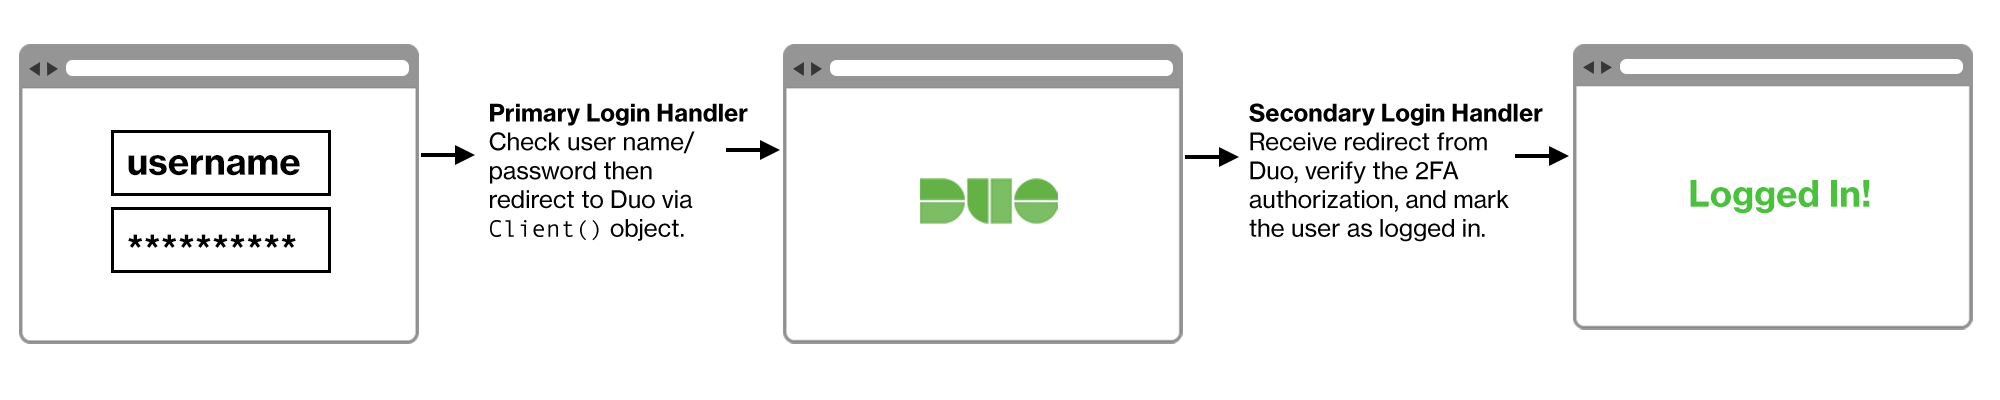 Duo Web Flow After